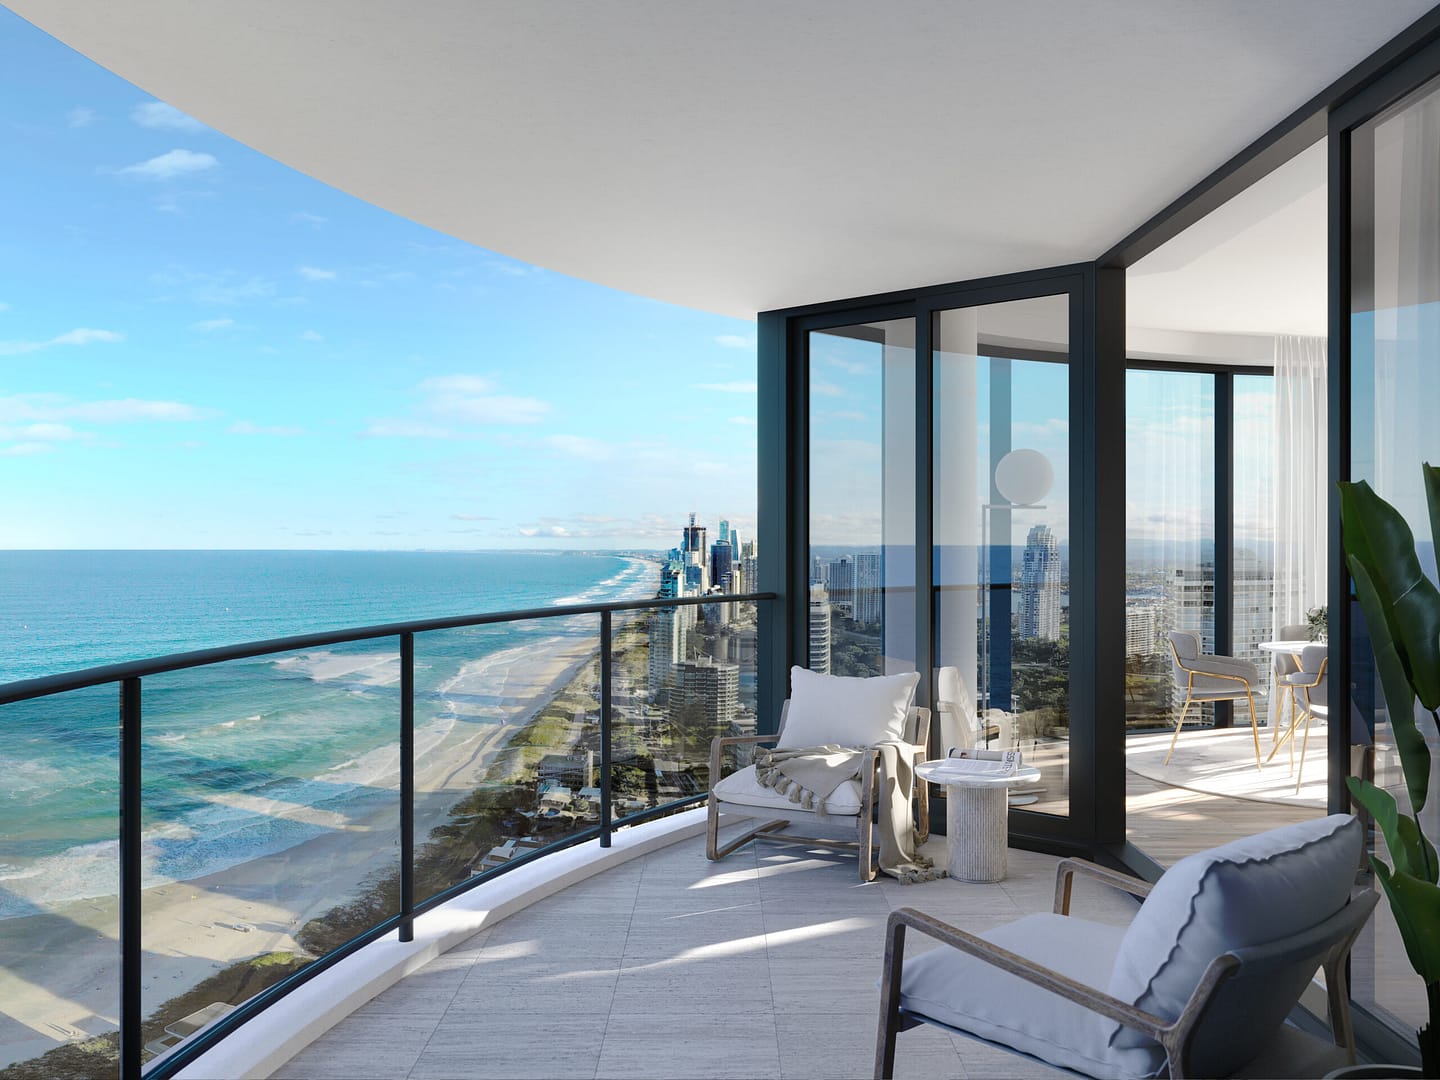 Balcony view of ocean in high rise luxury apartment